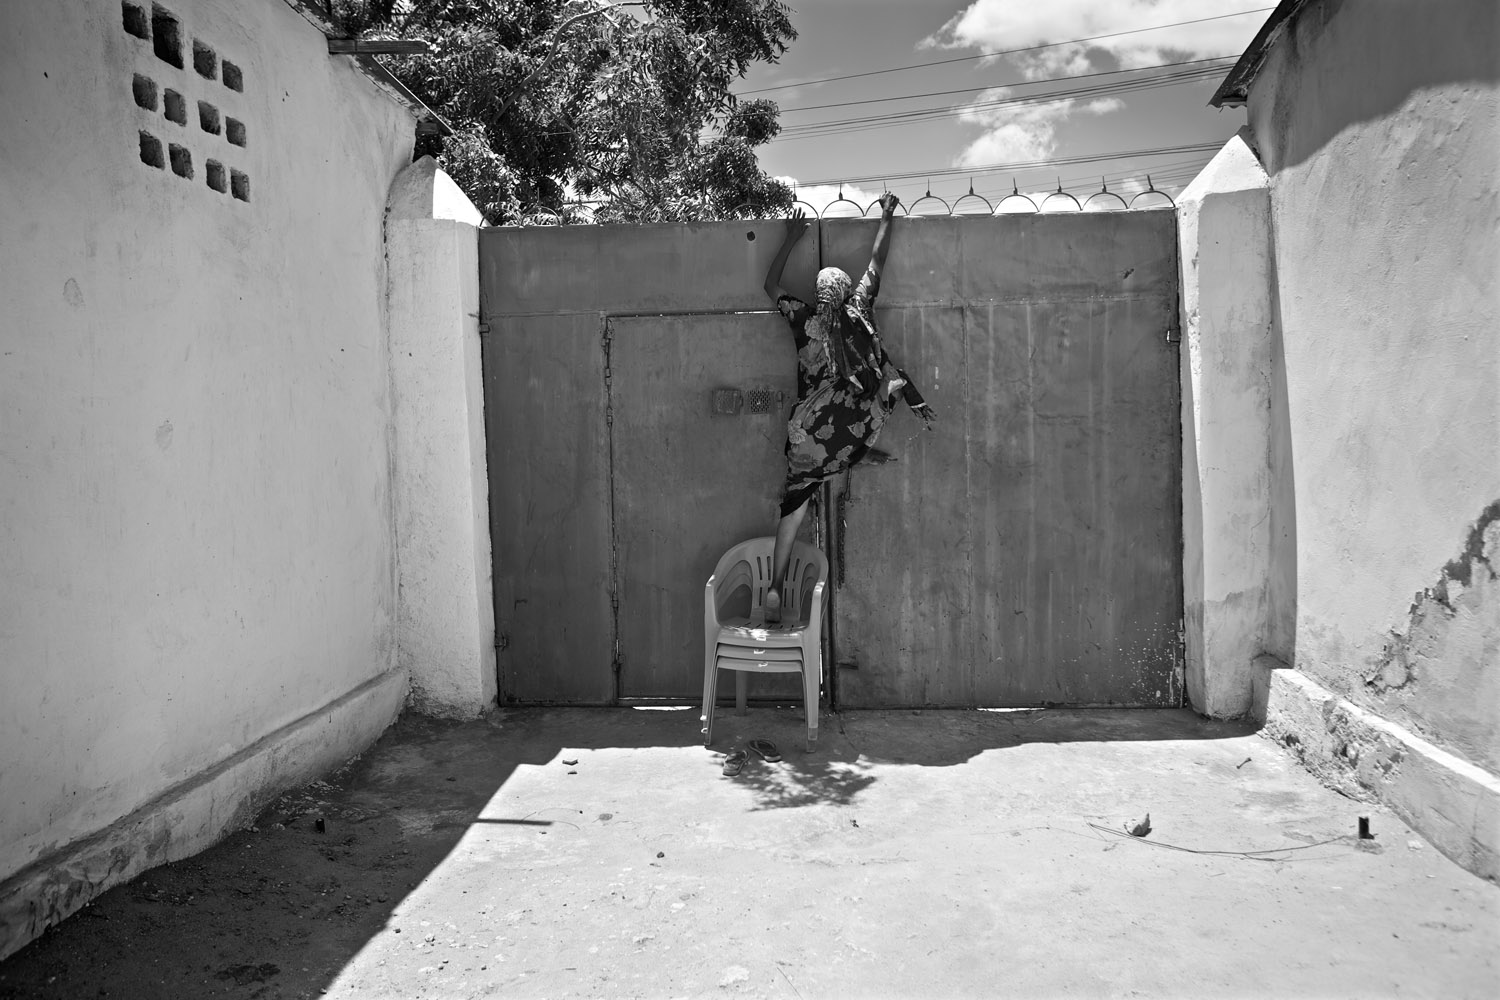 A female patient at Galkayo Mental Health Center tries to escape the hospital. Puntland, Somalia. June 2011.